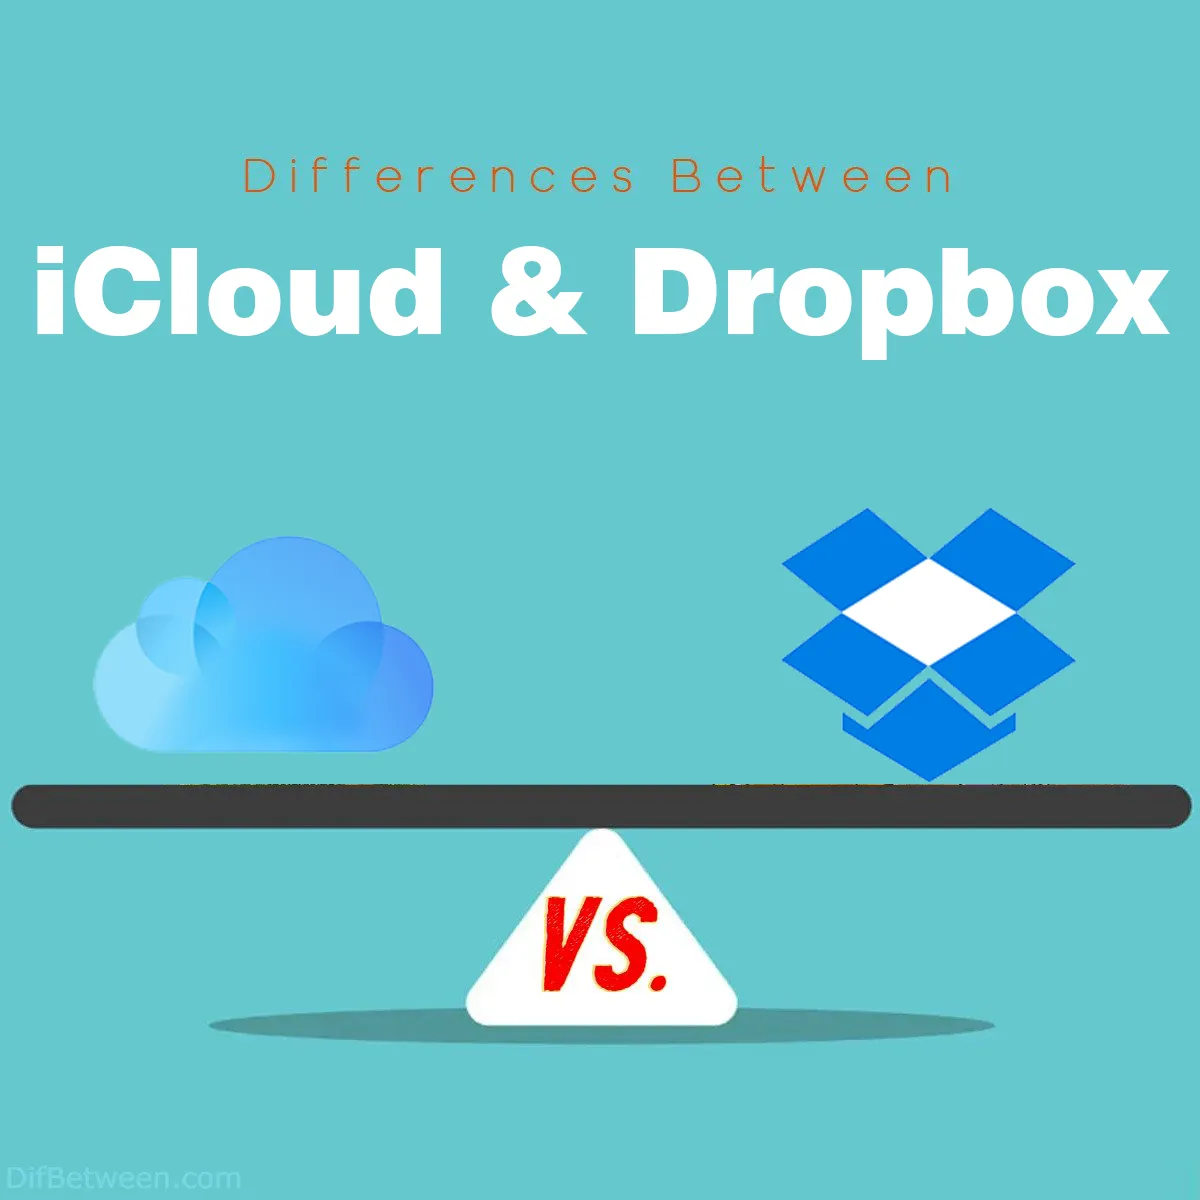 Differences Between iCloud and Dropbox